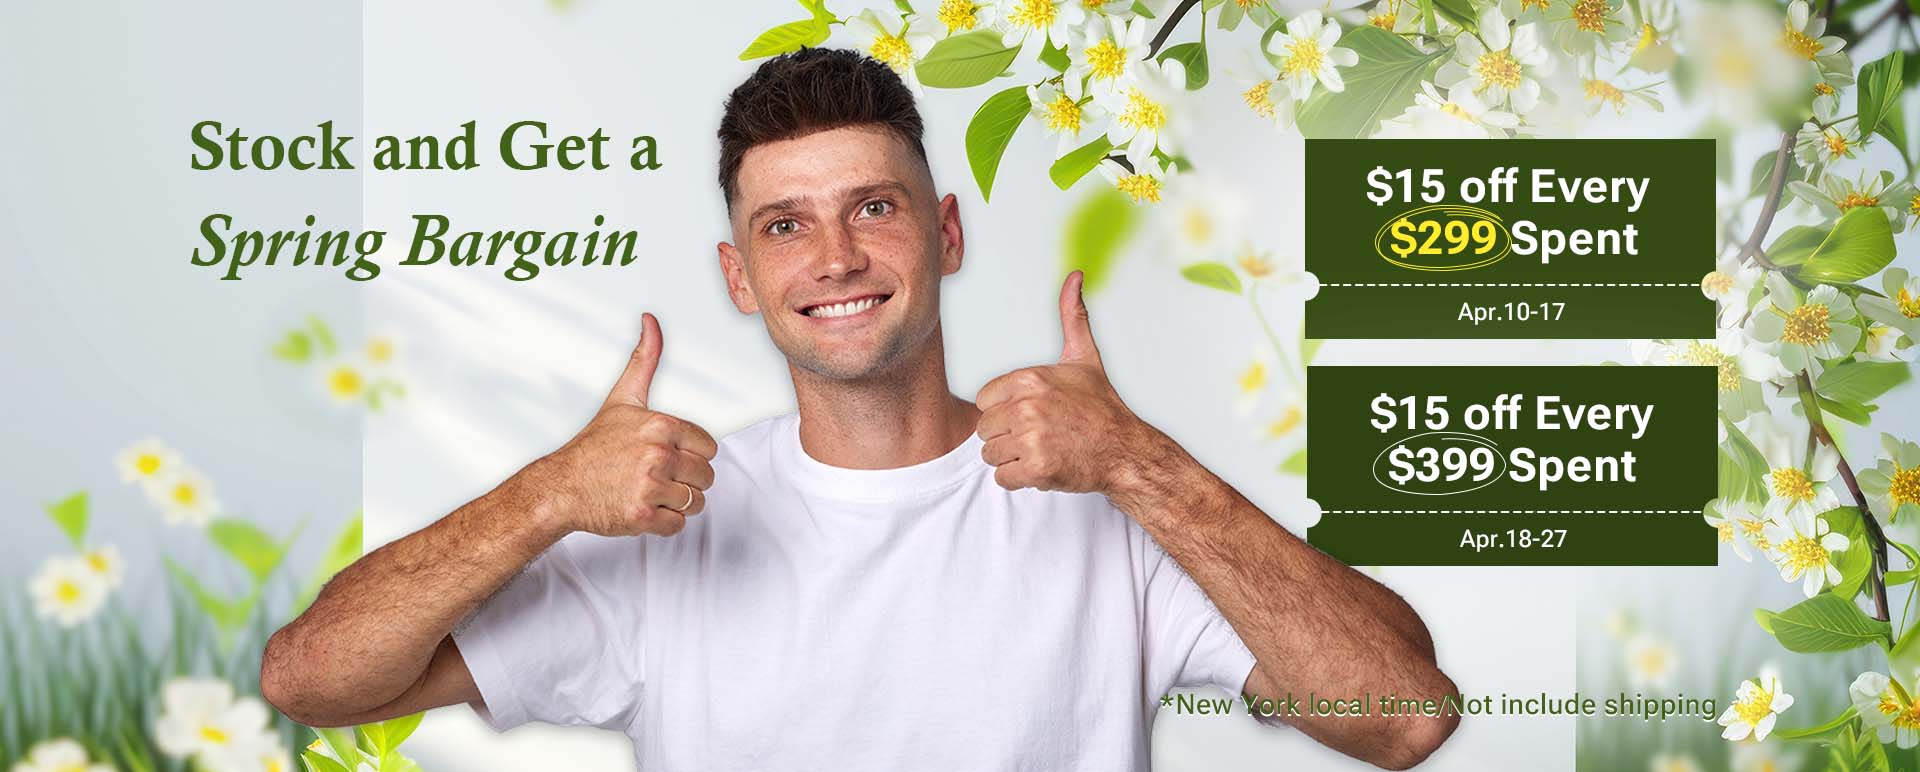 Newtimes Hair banner for Spring promotion on the home page featuring a man with a hair system dressed in a white t-shirt giving a thumbs-up gesture, including text on discount policies